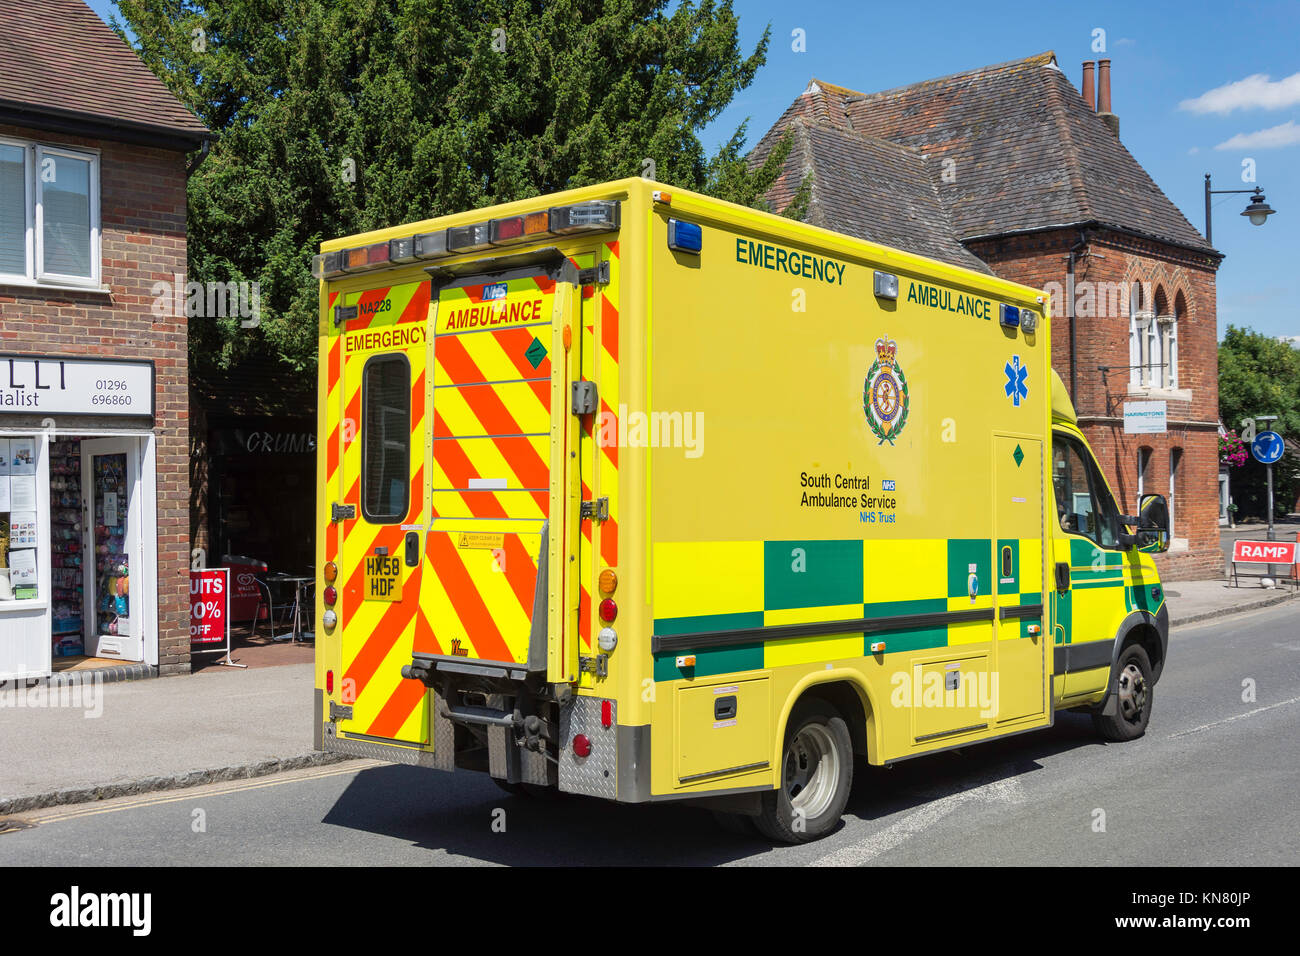 South Central ambulance sur appel, High Street, Wendover, Buckinghamshire, Angleterre, Royaume-Uni Banque D'Images